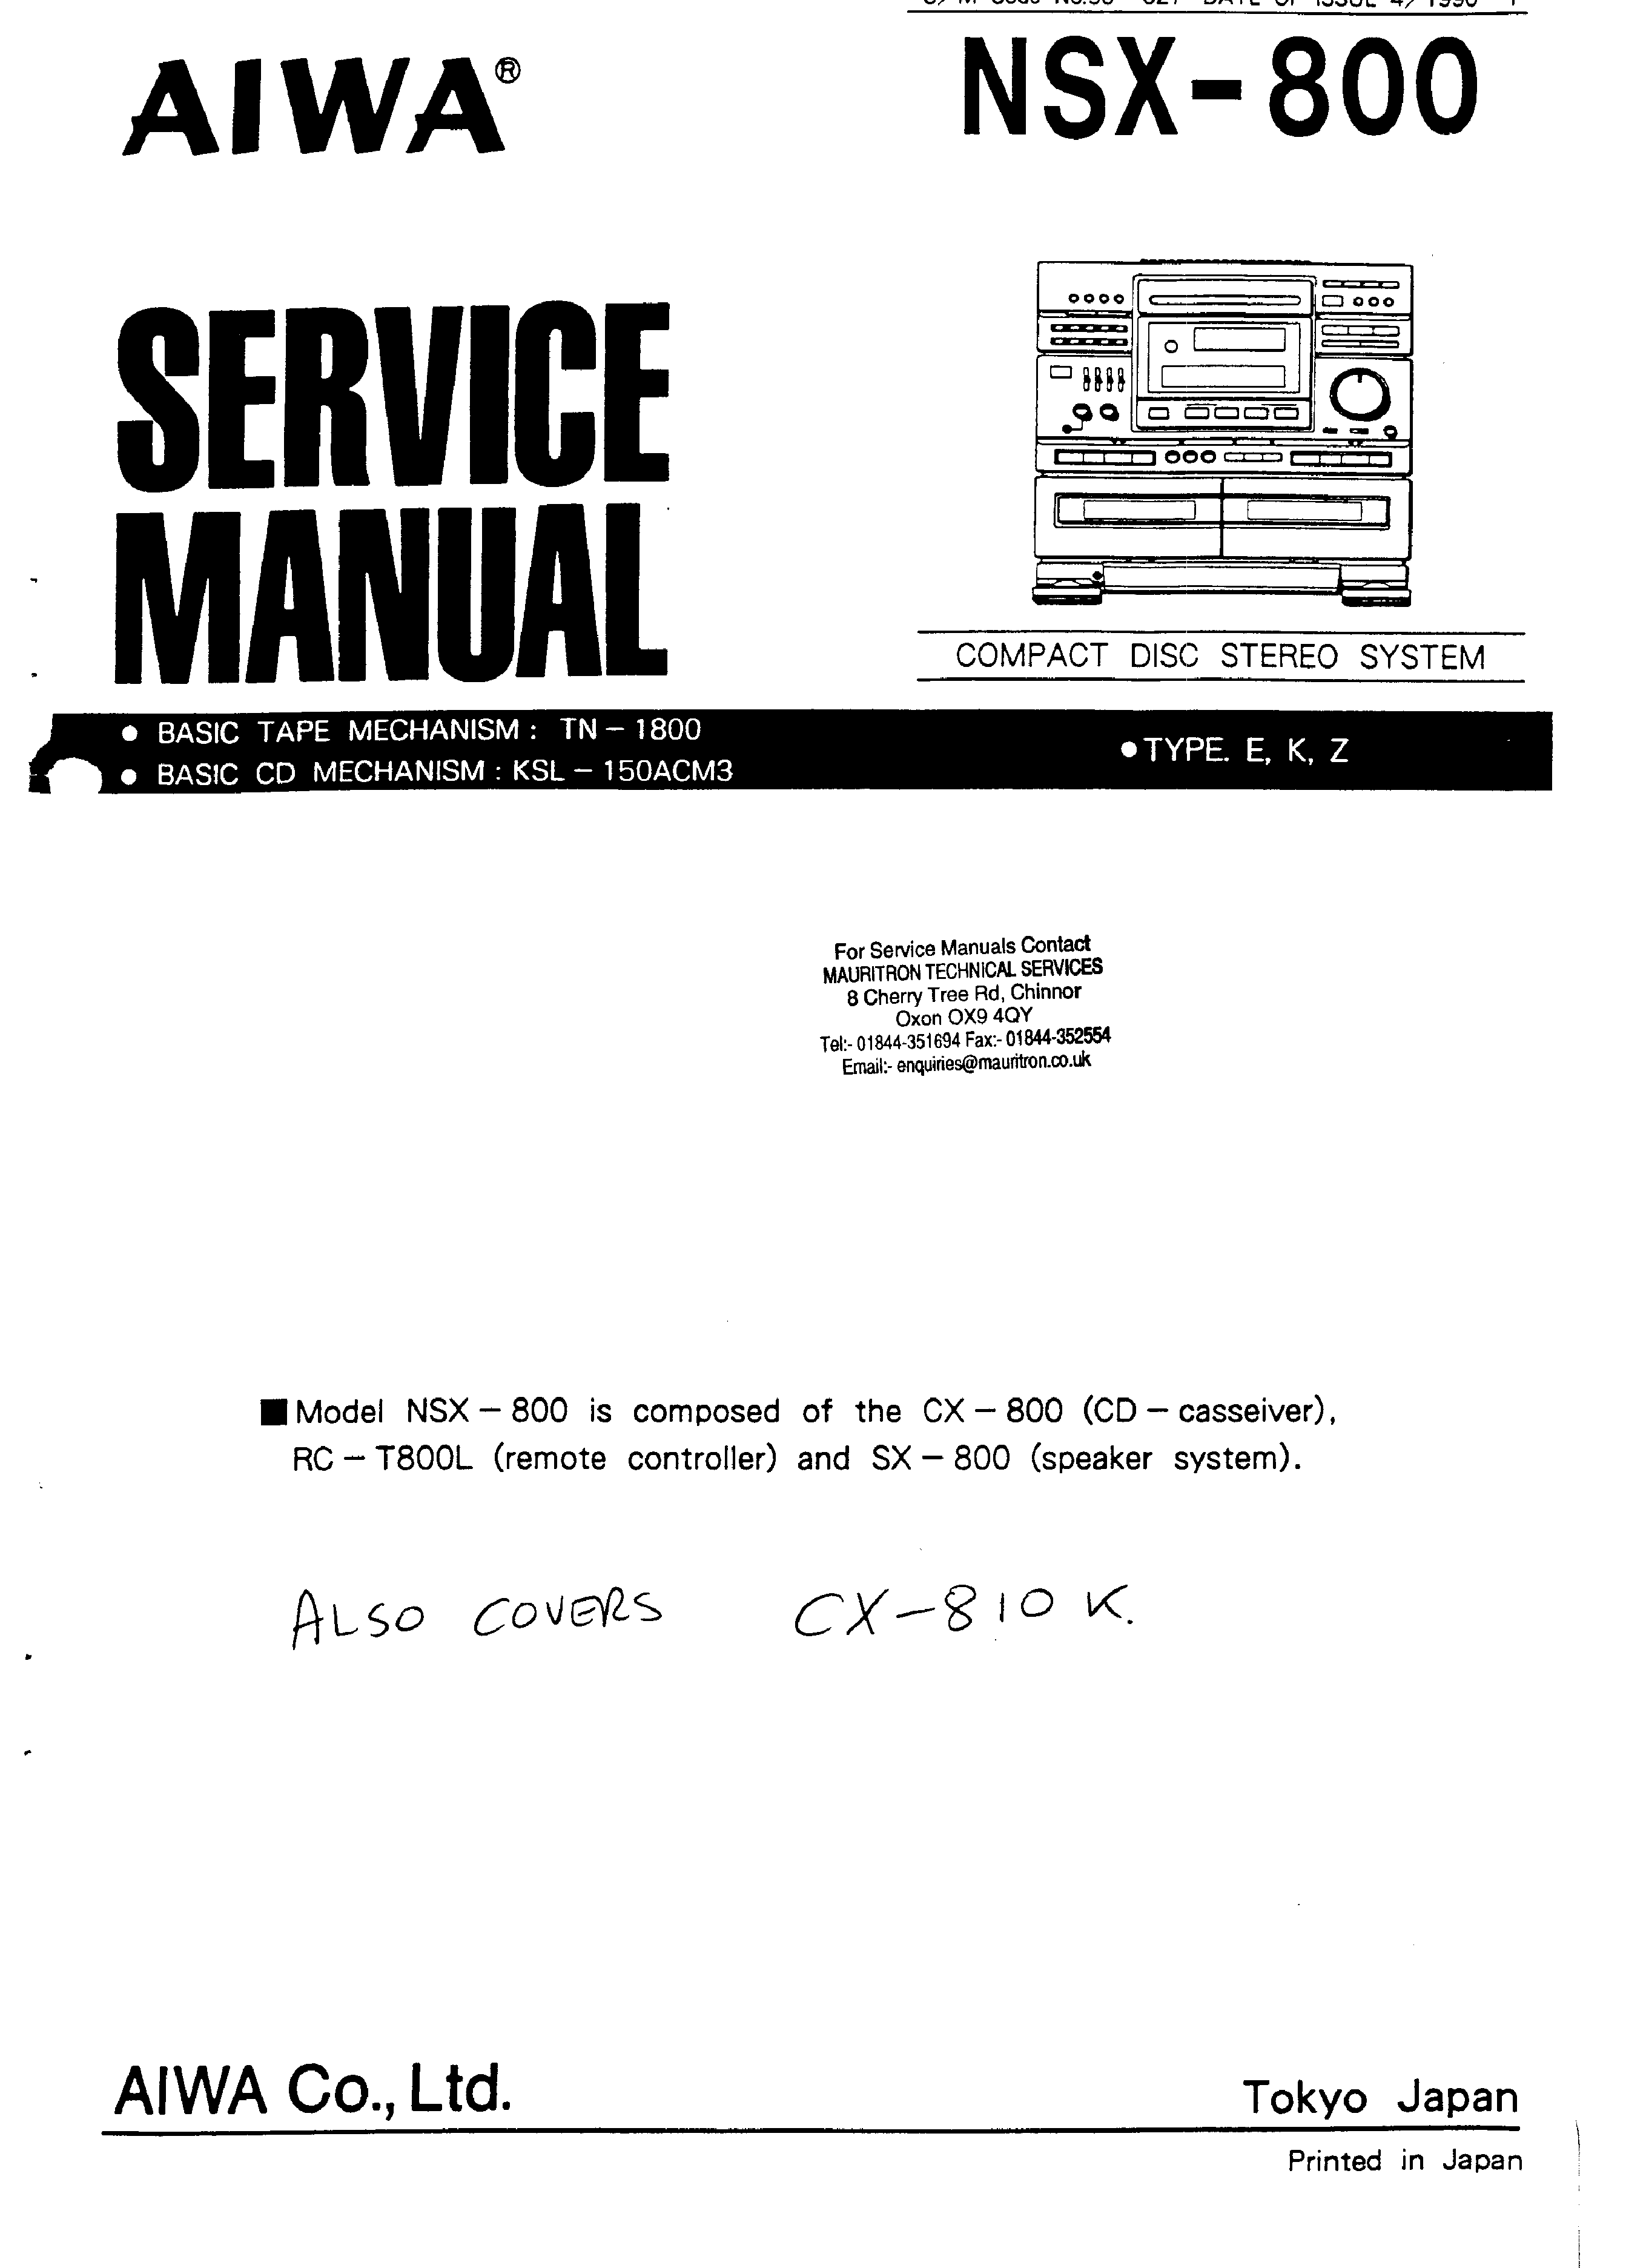 Aiwa compact disc stereo system manual